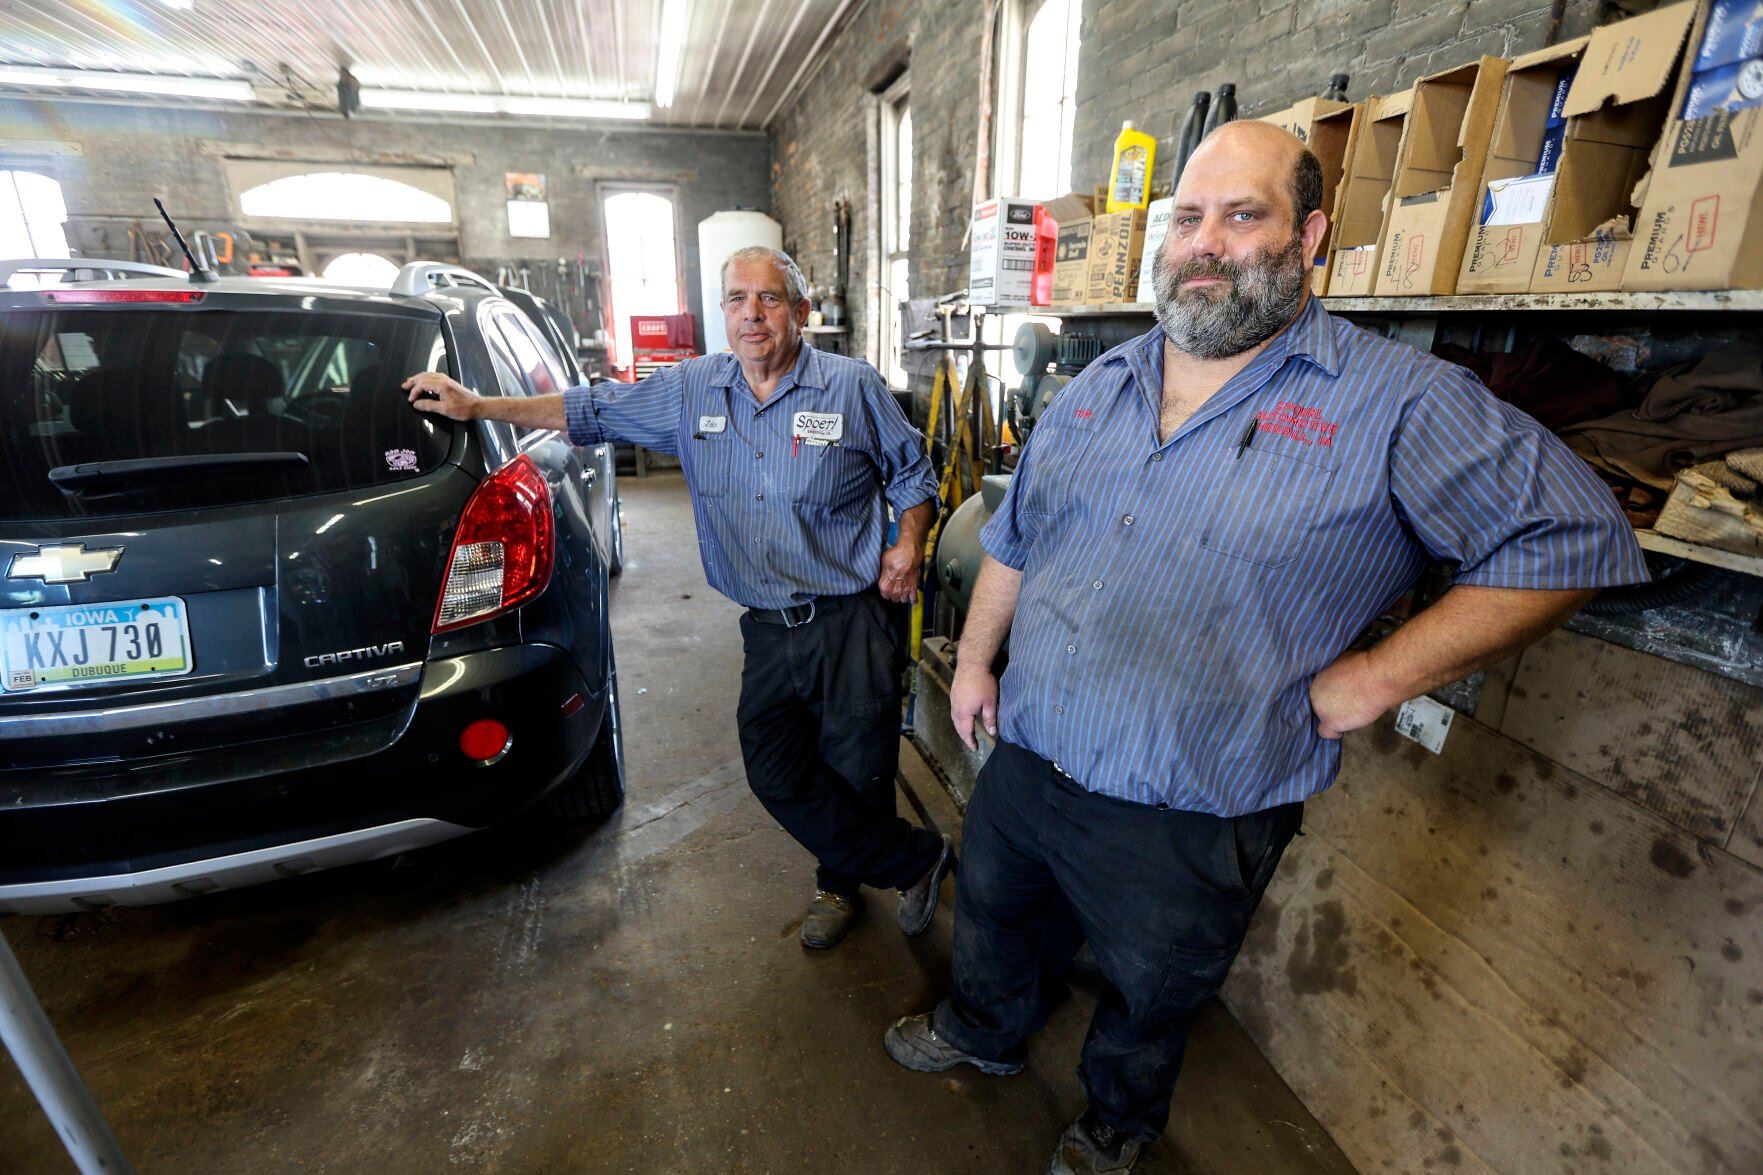 John Spoerl (left) and his son, Tom, work in the garage at Spoerl Automotive in Sherrill, Iowa. The business has been operating at the same location since 1917 and is now under its fourth generation of ownership.    PHOTO CREDIT: Dave Kettering
Telegraph Herald